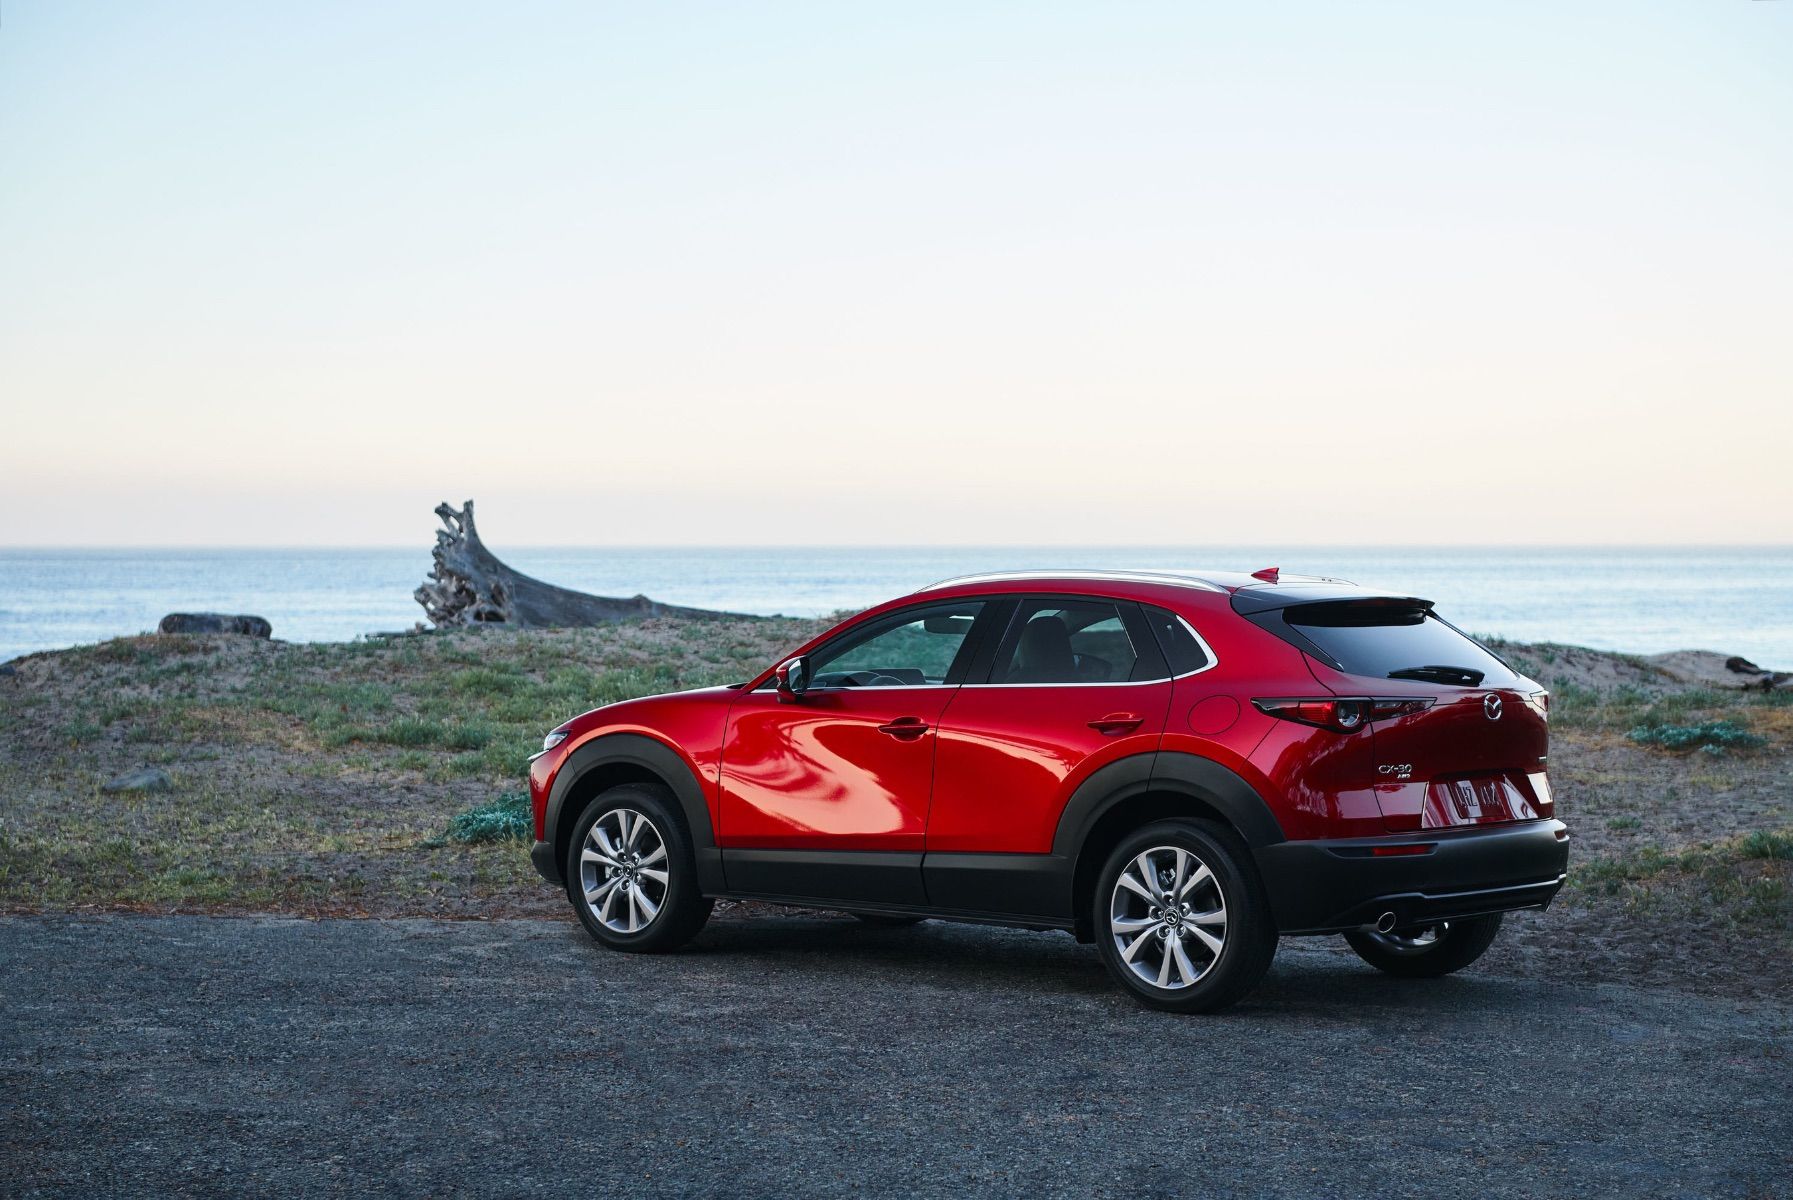 It's A Hit, So The Brand New Mazda CX-30 Gets More Standard Equipment For 2021